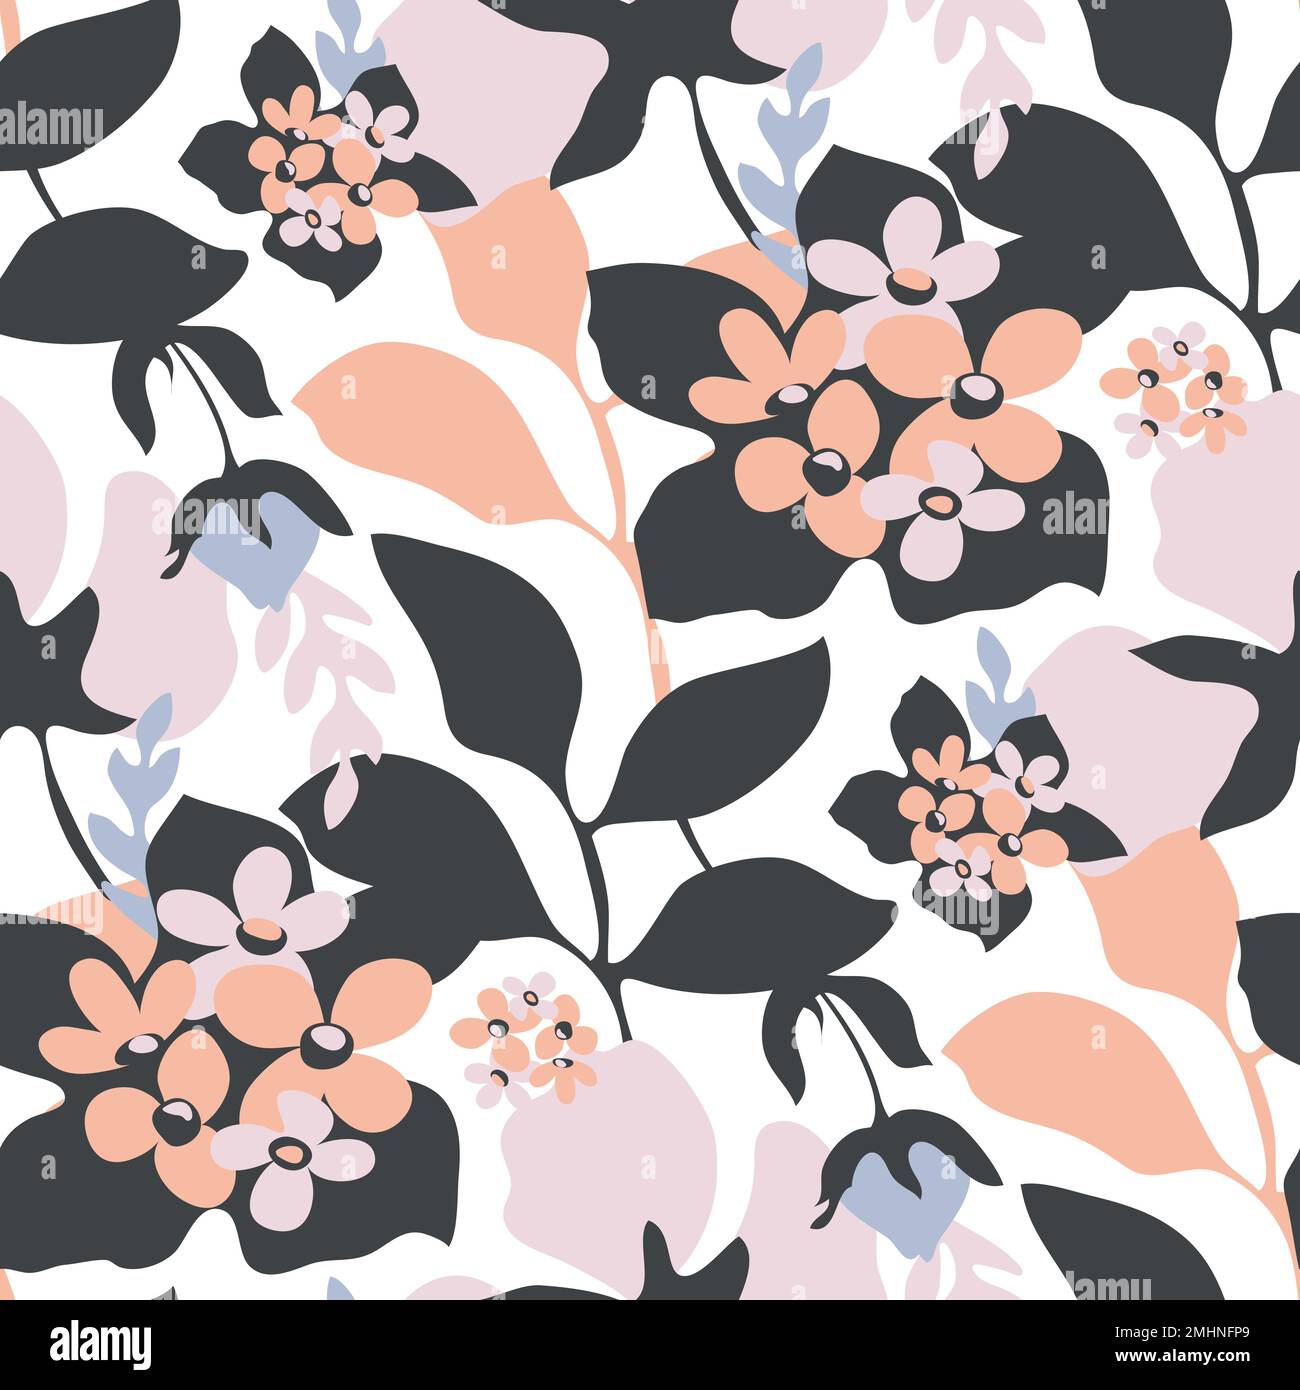 Vector floral seamless pattern. Blue, pink, dark and beige flowers and leaves Stock Vector